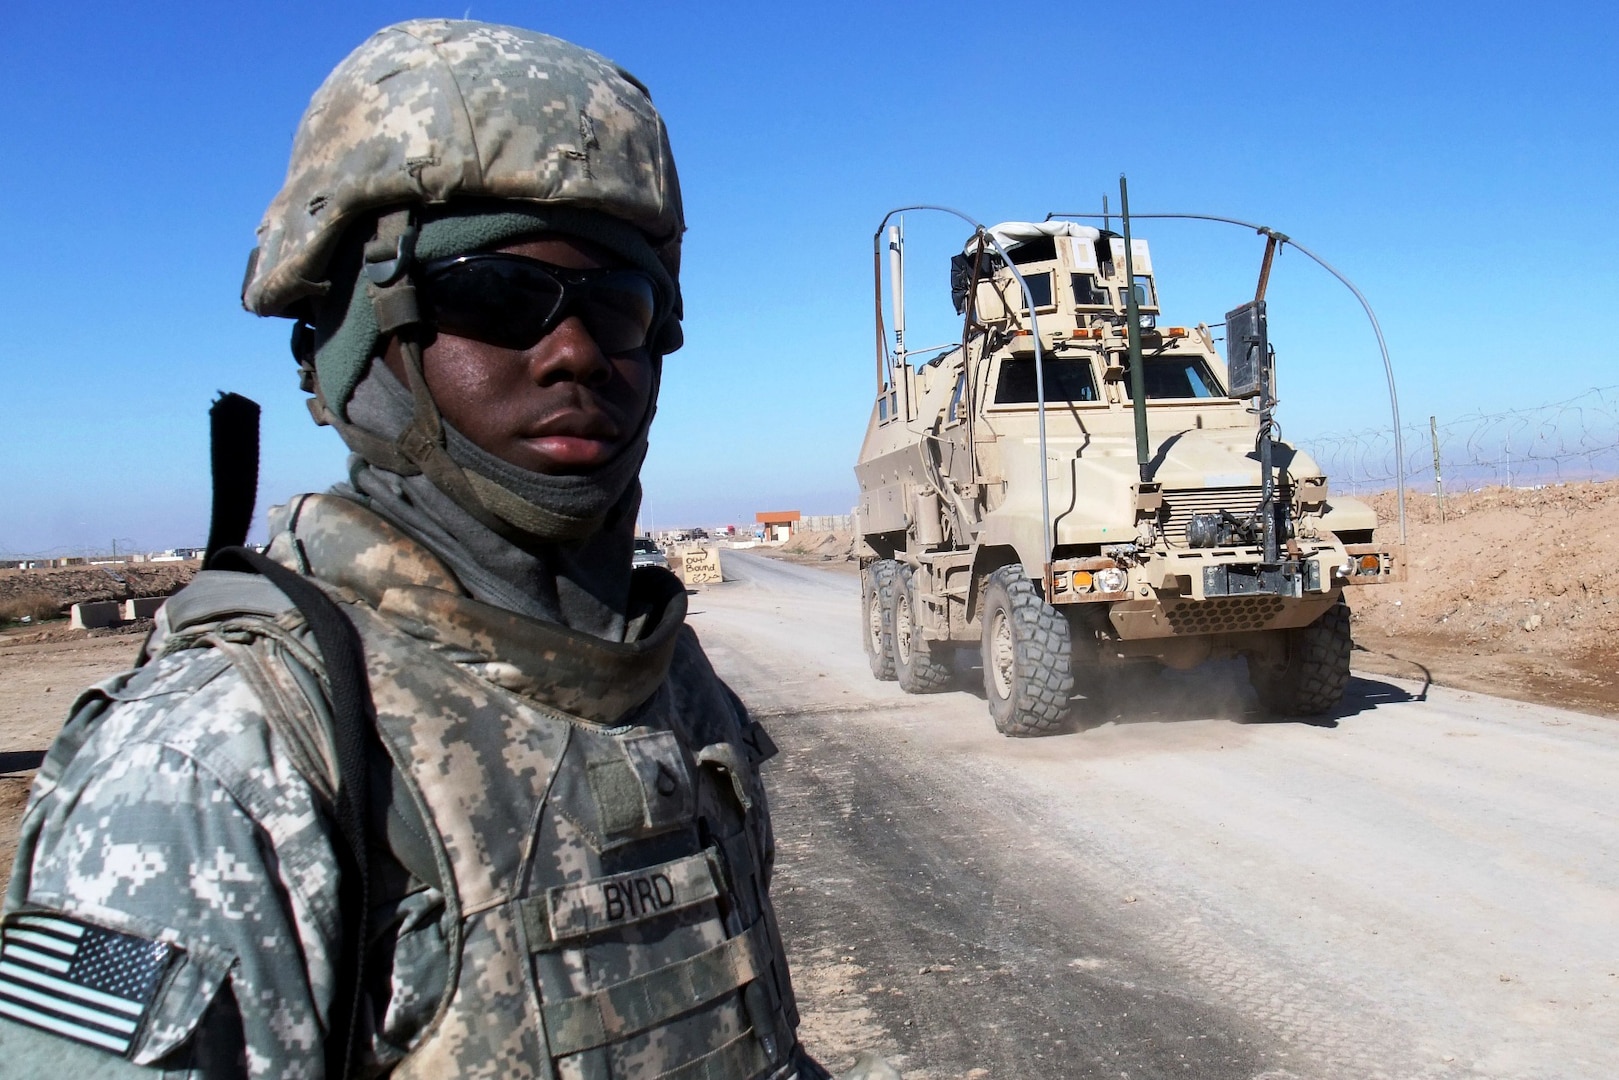 Master Pfc. Quintavis B. Byrd, a gate sentinel from the Mississippi National Guard, watches gun trucks pass the main entry control point of Contingency Operating Location Q-West, Jan. 10. Byrd serves with A Company, 2nd Battalion, 198th Combined Arms, 155th Brigade Combat Team, a mechanized infantry unit out of Hernando, Miss., that provides force protection to Q-West. This day marked the unit's sixth month of ECP operations. There have been no security breaches during their tenure.